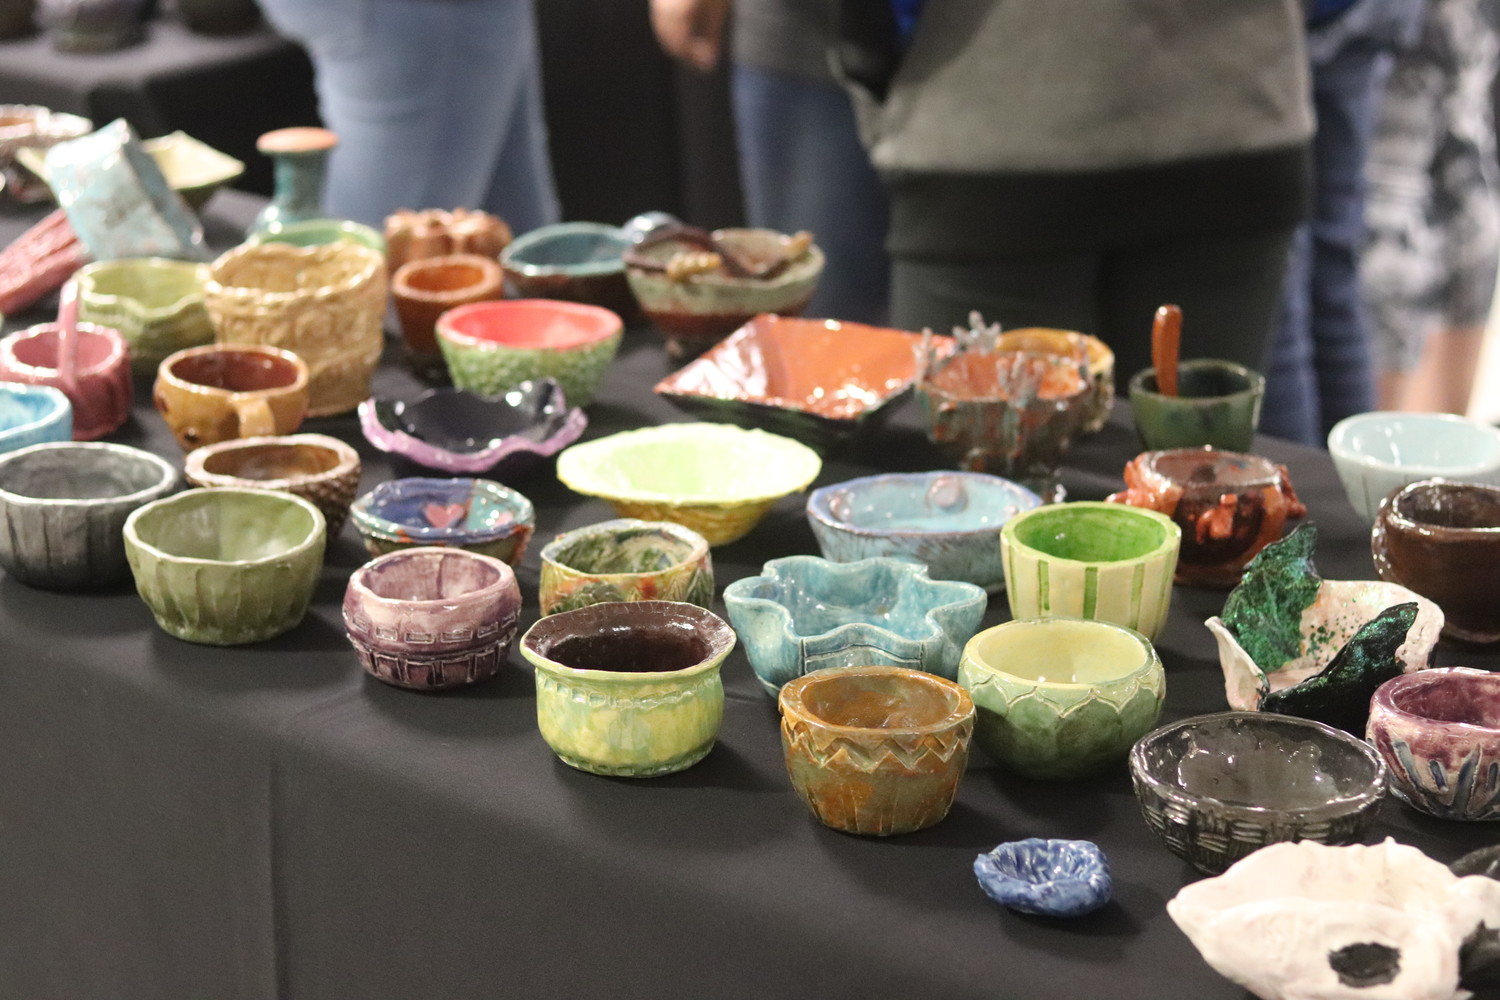 Each SOUPer Bowl guest selects a bowl handcrafted by students in St. Johns County schools